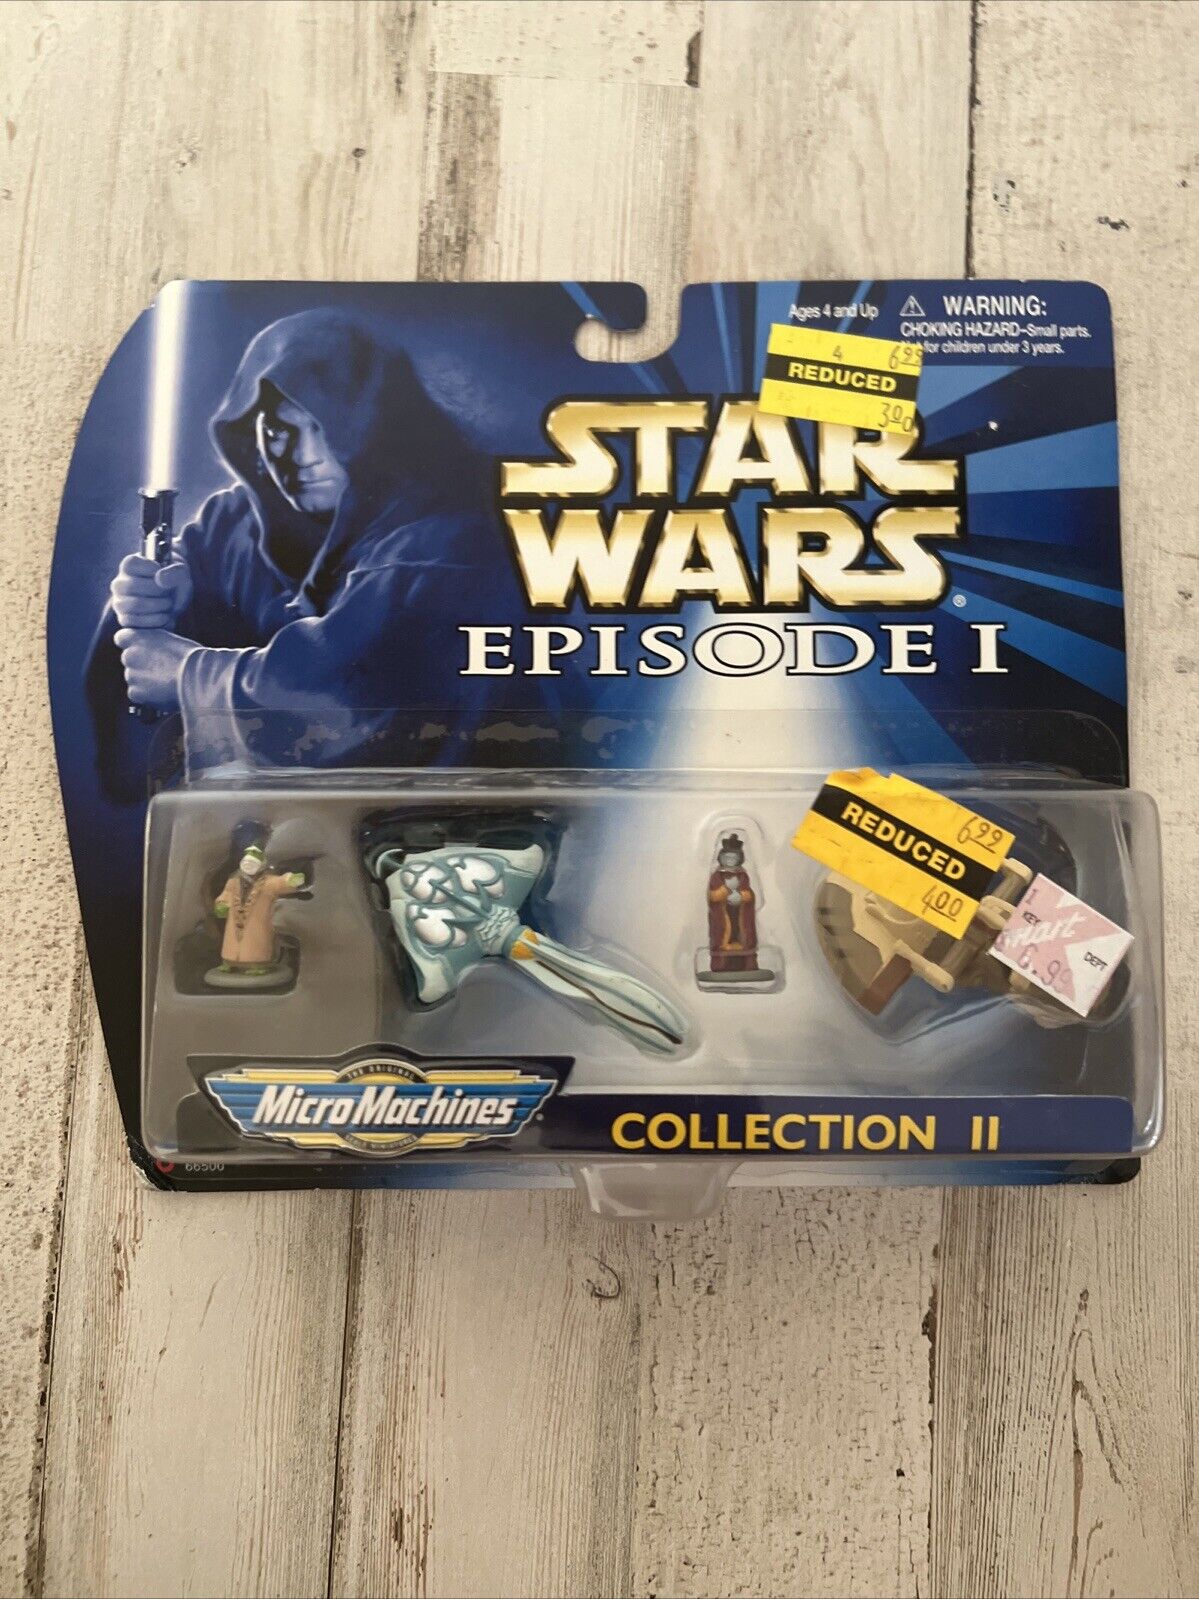 1998 Galoob Micro Machines Star Wars Episode 1 Collection II Action Figures Toys